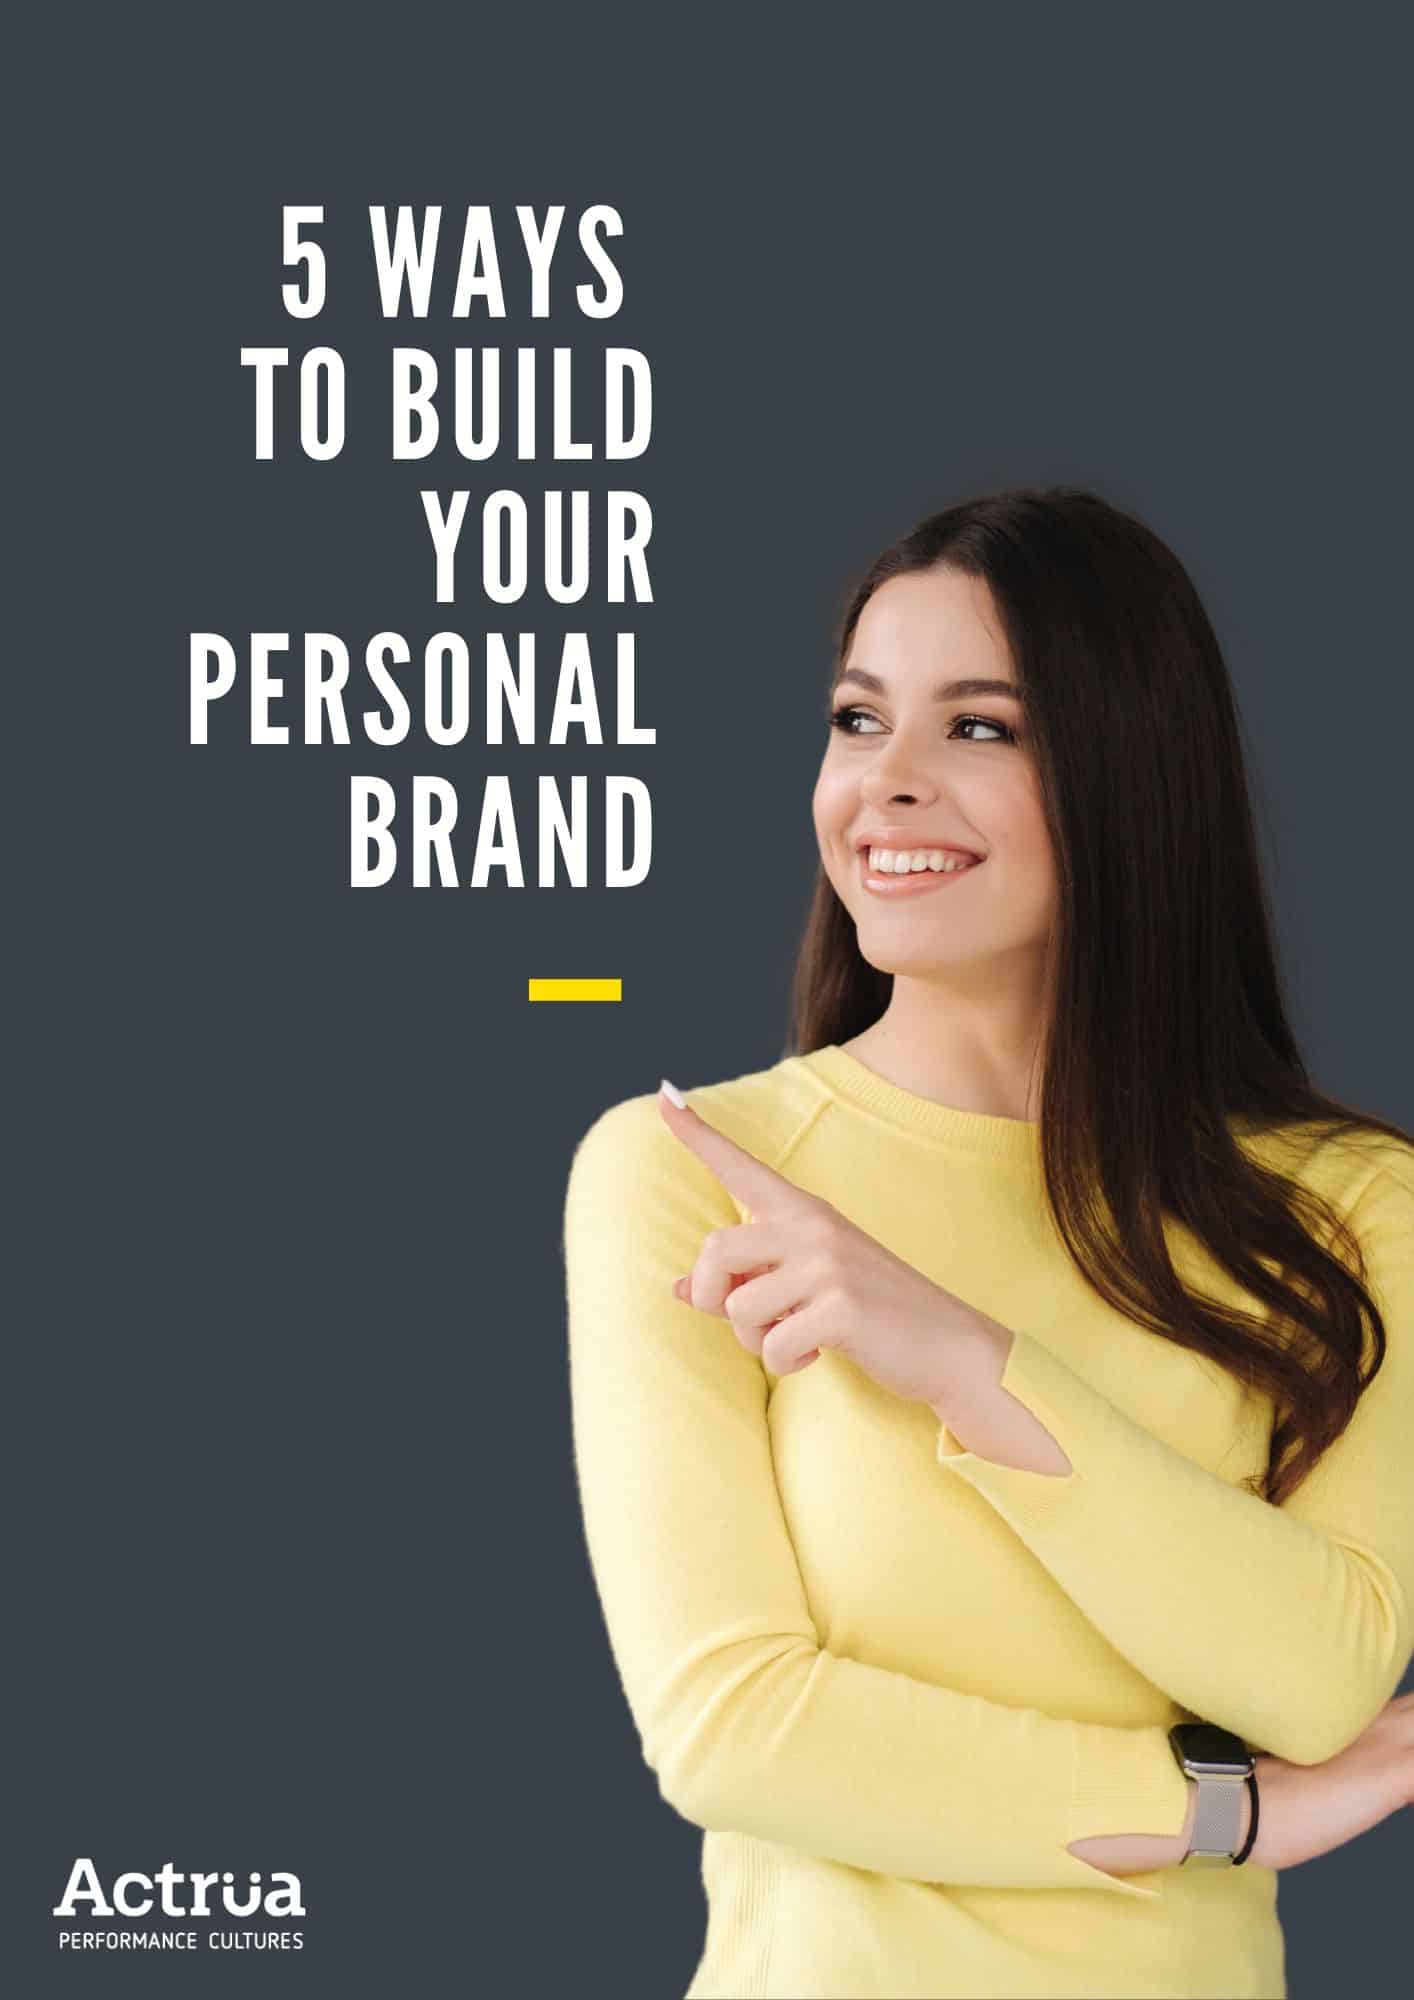 5 ways to build your personal brand